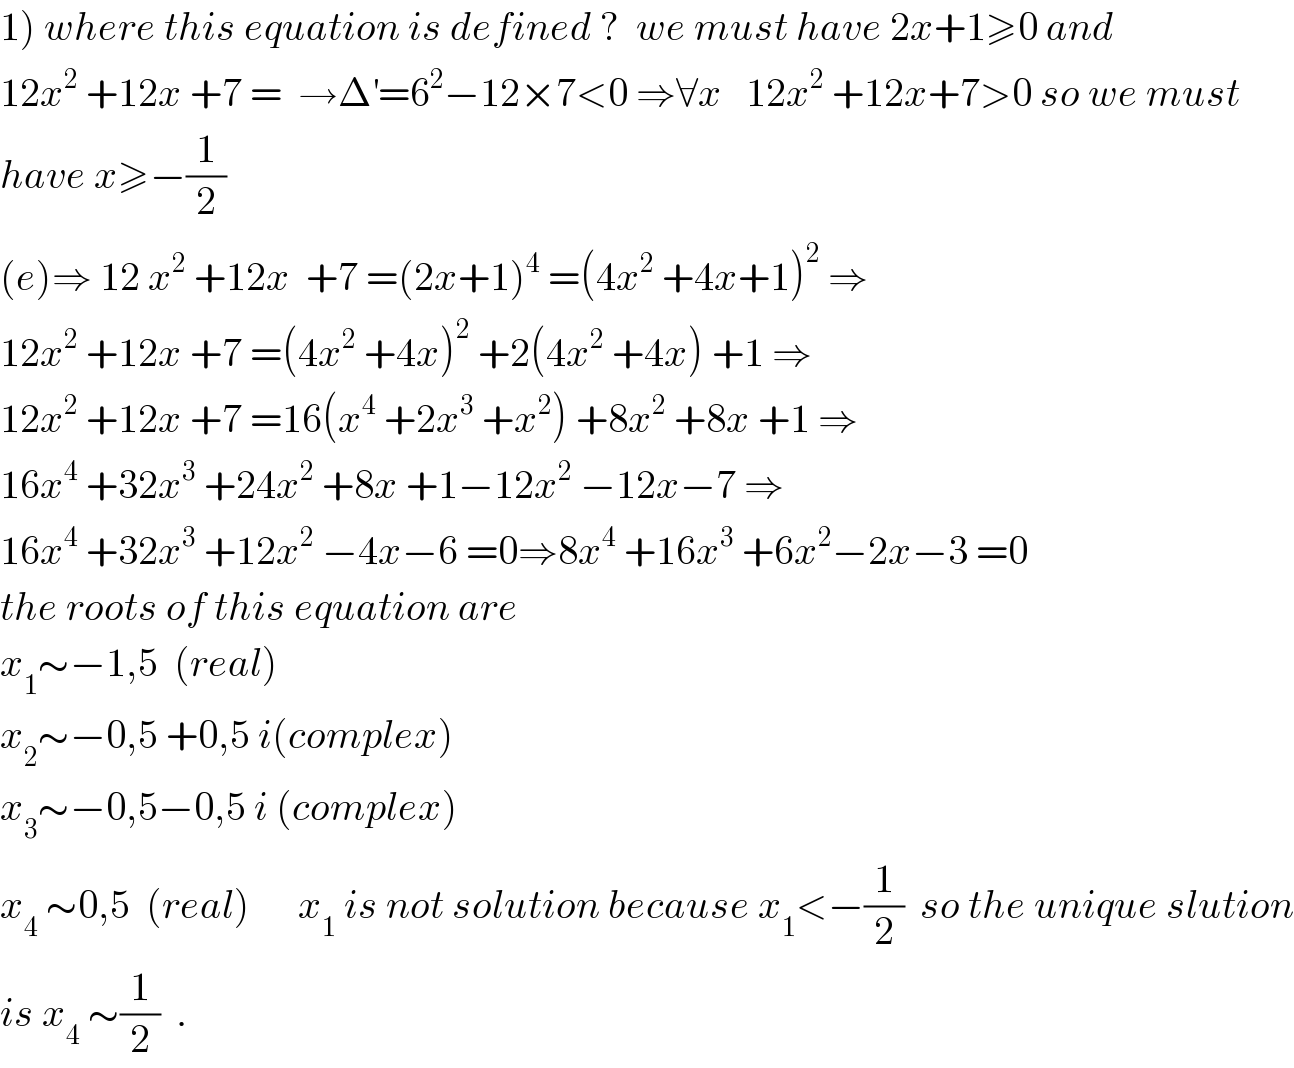 1) where this equation is defined ?  we must have 2x+1≥0 and  12x^2  +12x +7 =  →Δ^′ =6^2 −12×7<0 ⇒∀x   12x^2  +12x+7>0 so we must  have x≥−(1/2)  (e)⇒ 12 x^2  +12x  +7 =(2x+1)^4  =(4x^2  +4x+1)^2  ⇒  12x^2  +12x +7 =(4x^2  +4x)^2  +2(4x^2  +4x) +1 ⇒  12x^2  +12x +7 =16(x^4  +2x^3  +x^2 ) +8x^2  +8x +1 ⇒  16x^4  +32x^3  +24x^2  +8x +1−12x^2  −12x−7 ⇒  16x^4  +32x^3  +12x^2  −4x−6 =0⇒8x^4  +16x^3  +6x^2 −2x−3 =0  the roots of this equation are   x_1 ∼−1,5  (real)  x_2 ∼−0,5 +0,5 i(complex)  x_3 ∼−0,5−0,5 i (complex)  x_4  ∼0,5  (real)      x_1  is not solution because x_1 <−(1/2)  so the unique slution  is x_4  ∼(1/2)  .  